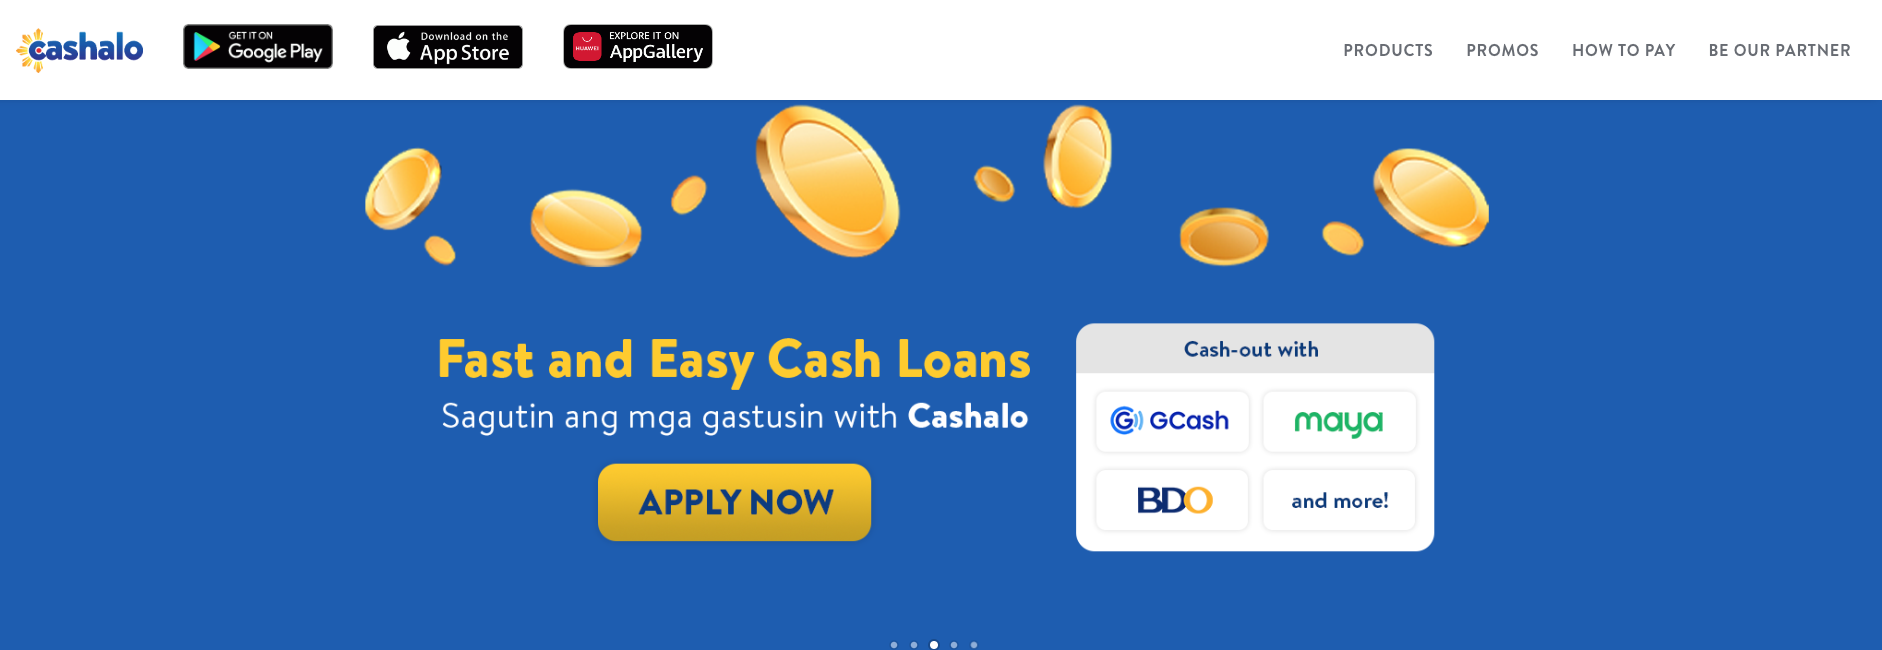 cashalo loan application - what is cashalo